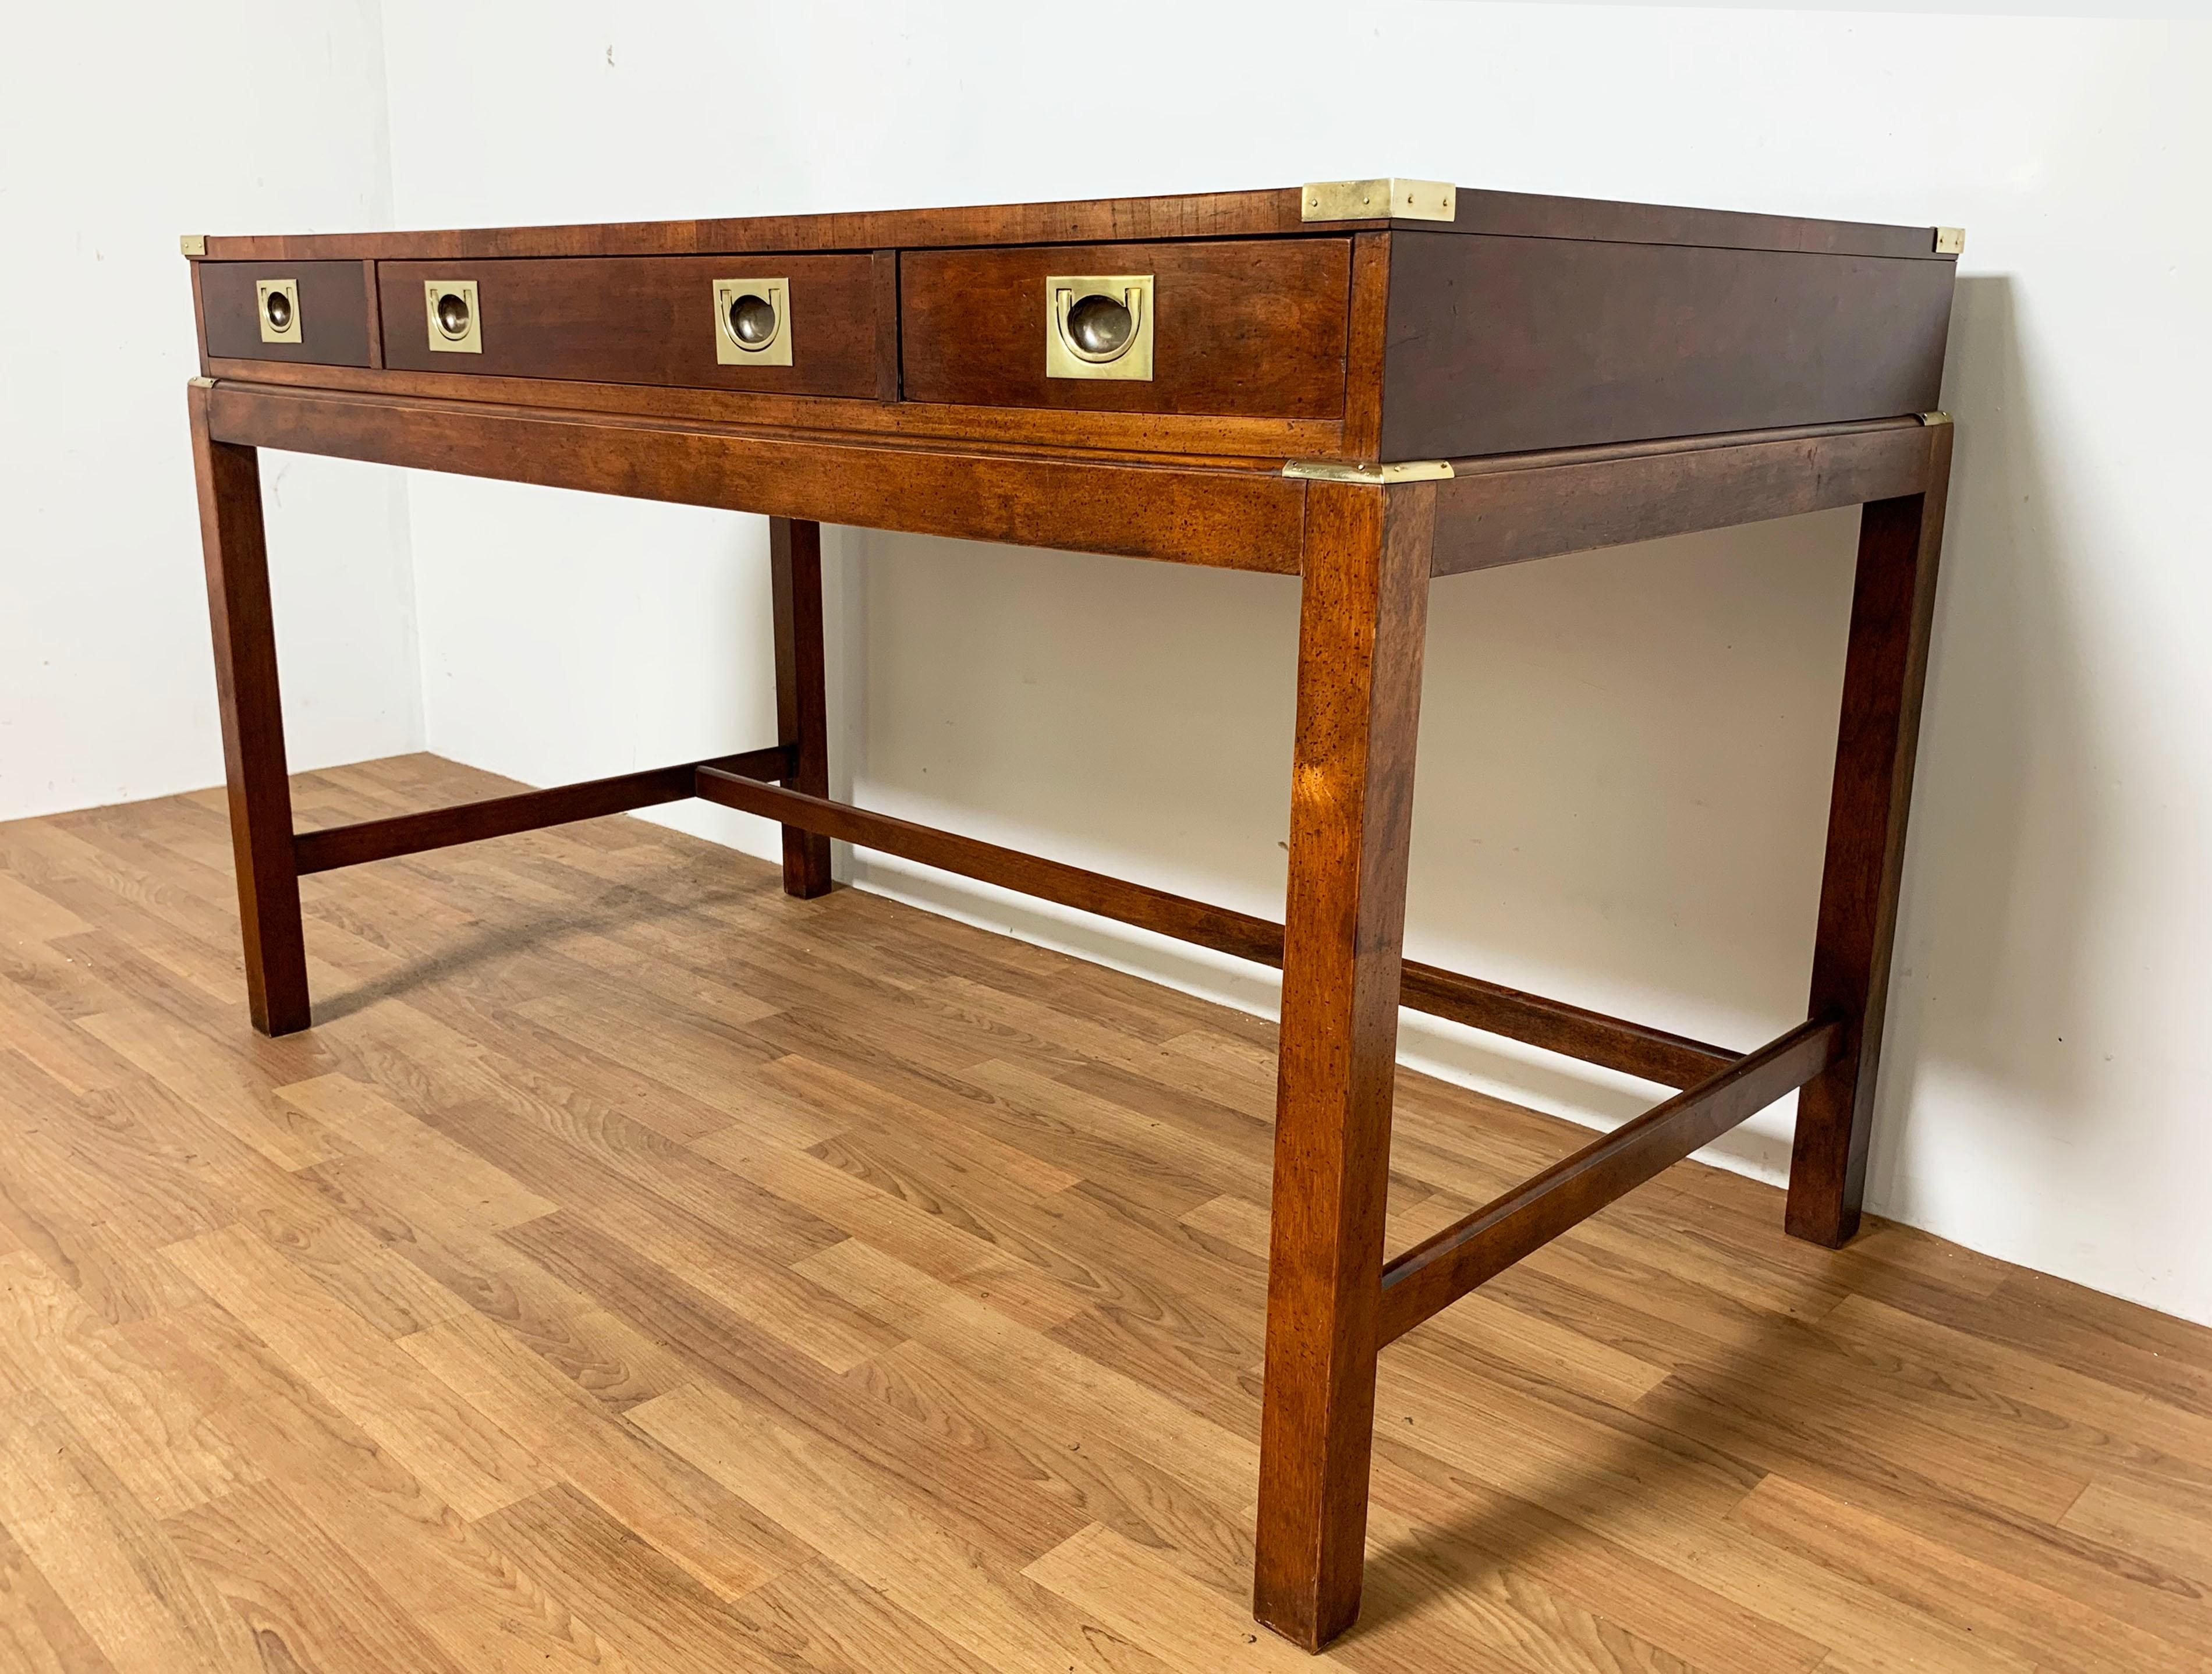 A campaign style writing desk in mahogany with brass hardware, circa 1970s.